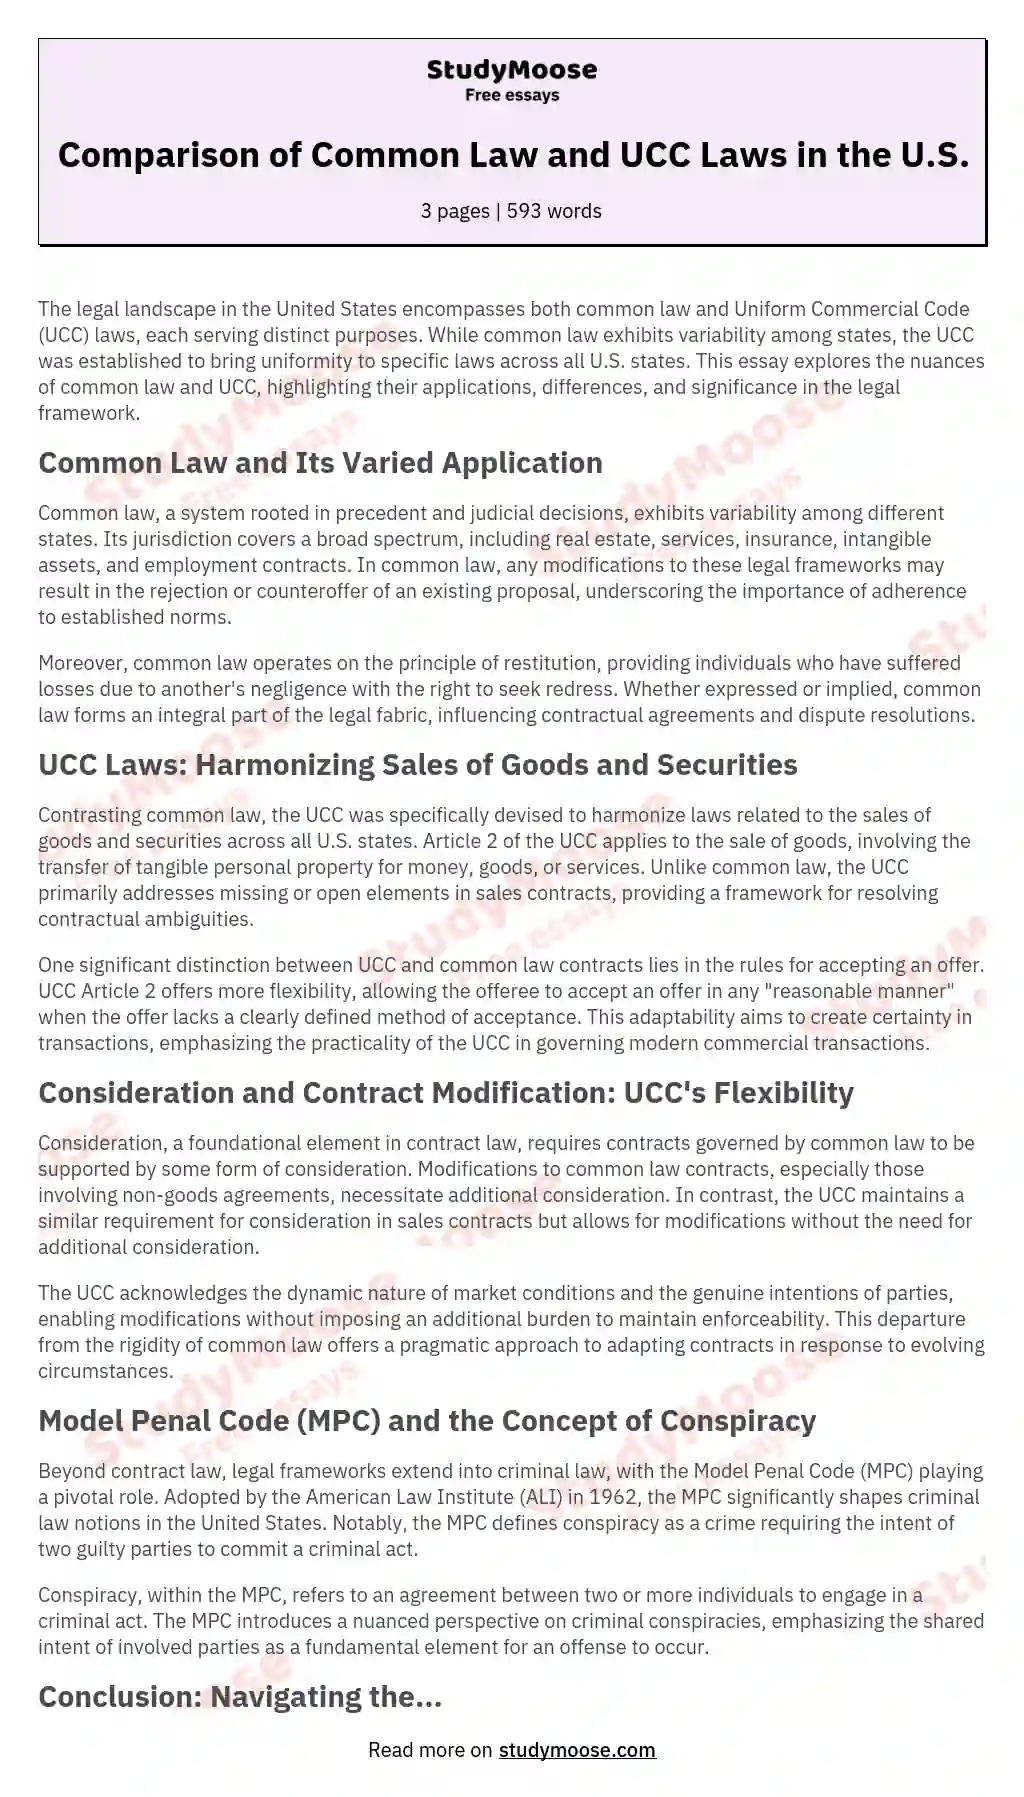 Comparison of Common Law and UCC Laws in the U.S. essay